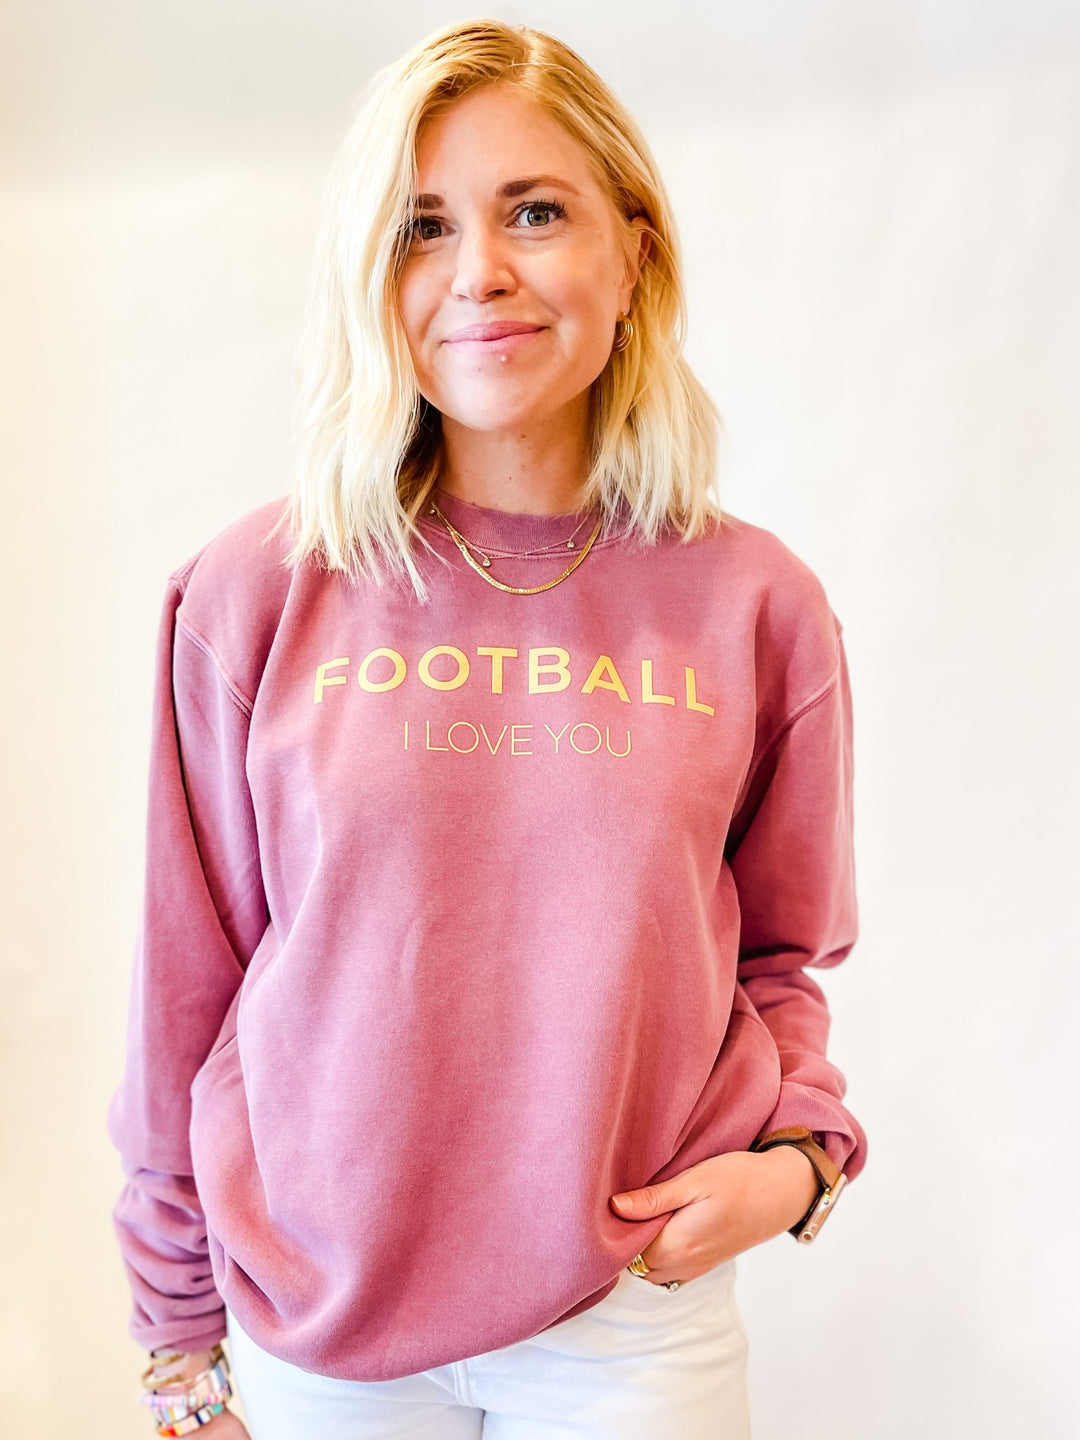 Boat House Apparel - Football I Love You Sweatshirt in Red/Yellow